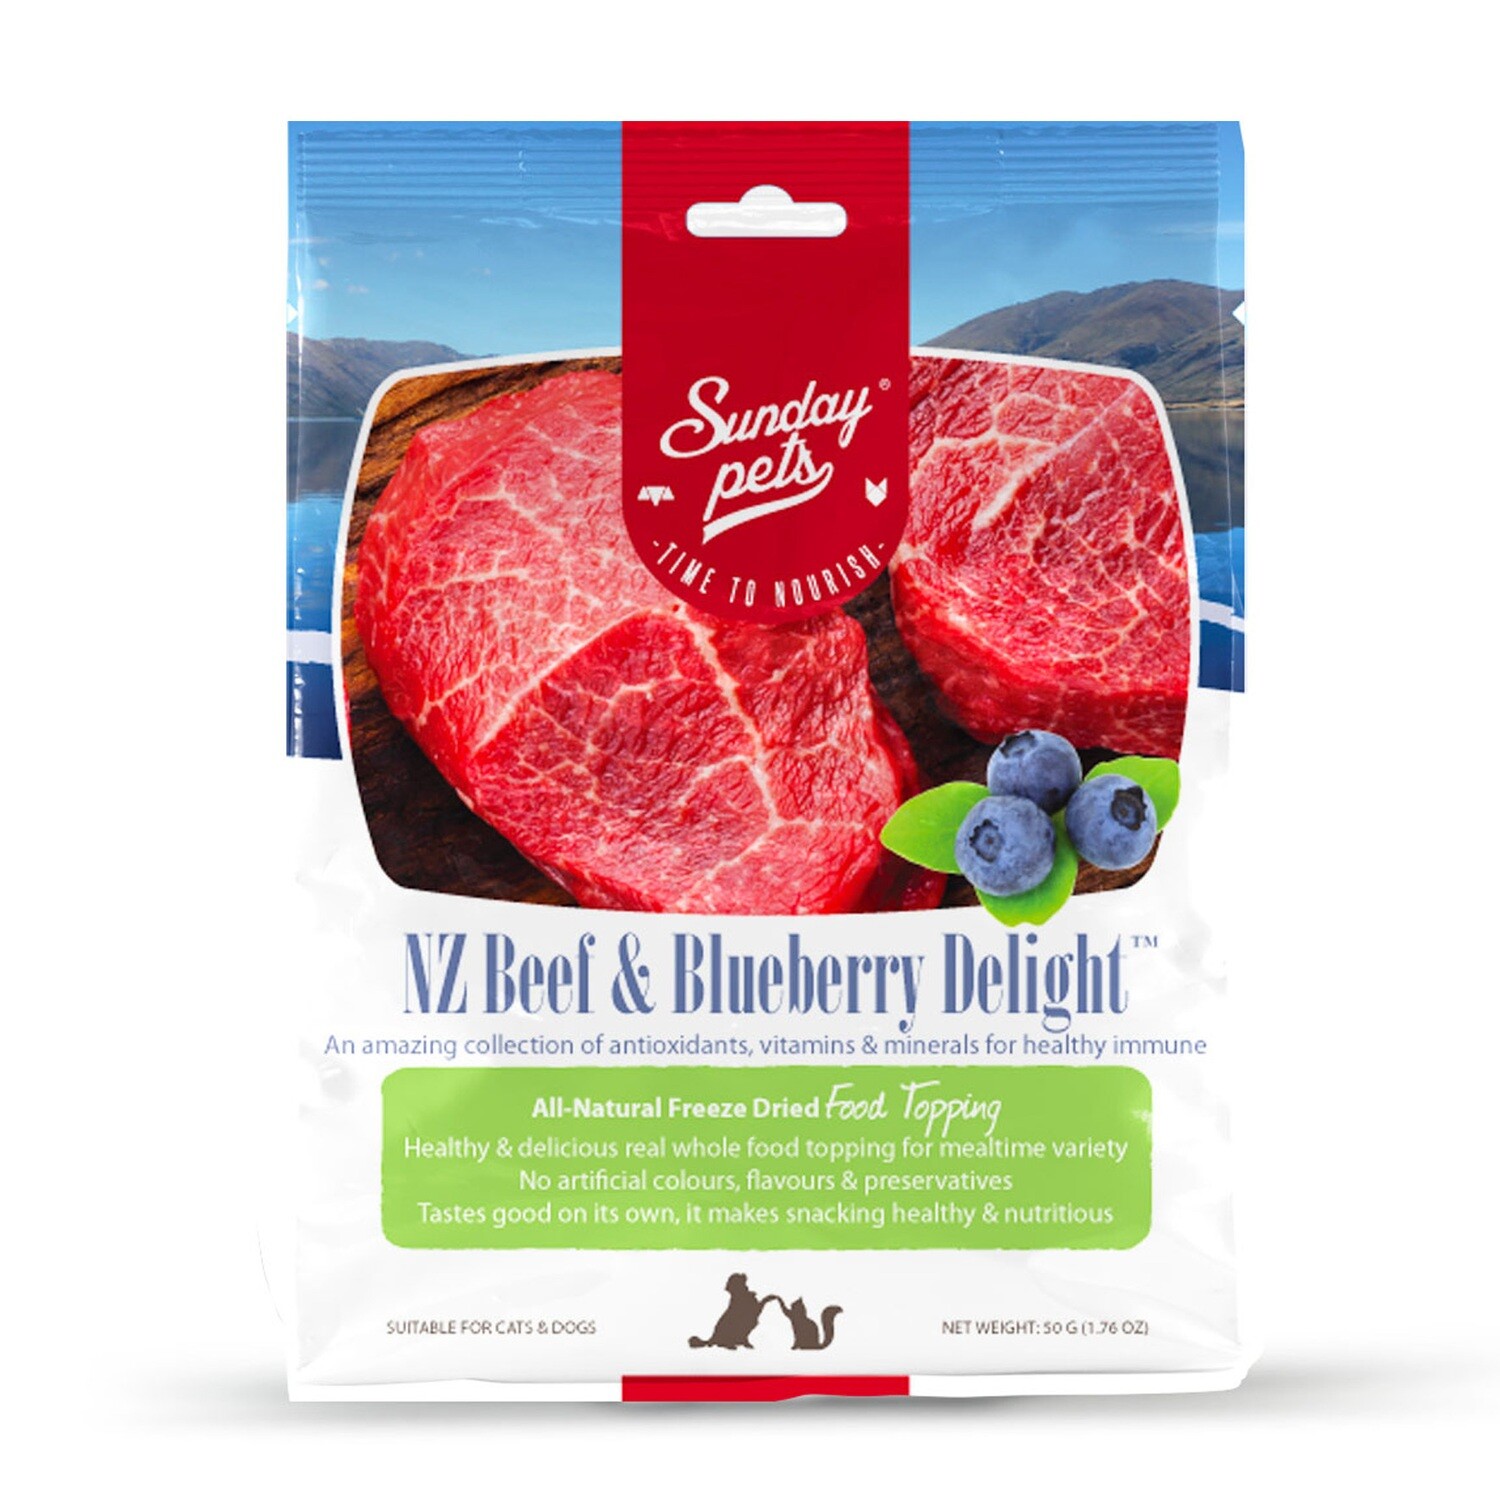 Sunday Pets NZ Beef & Blueberry Delight Freeze Dried Food Topping-50g